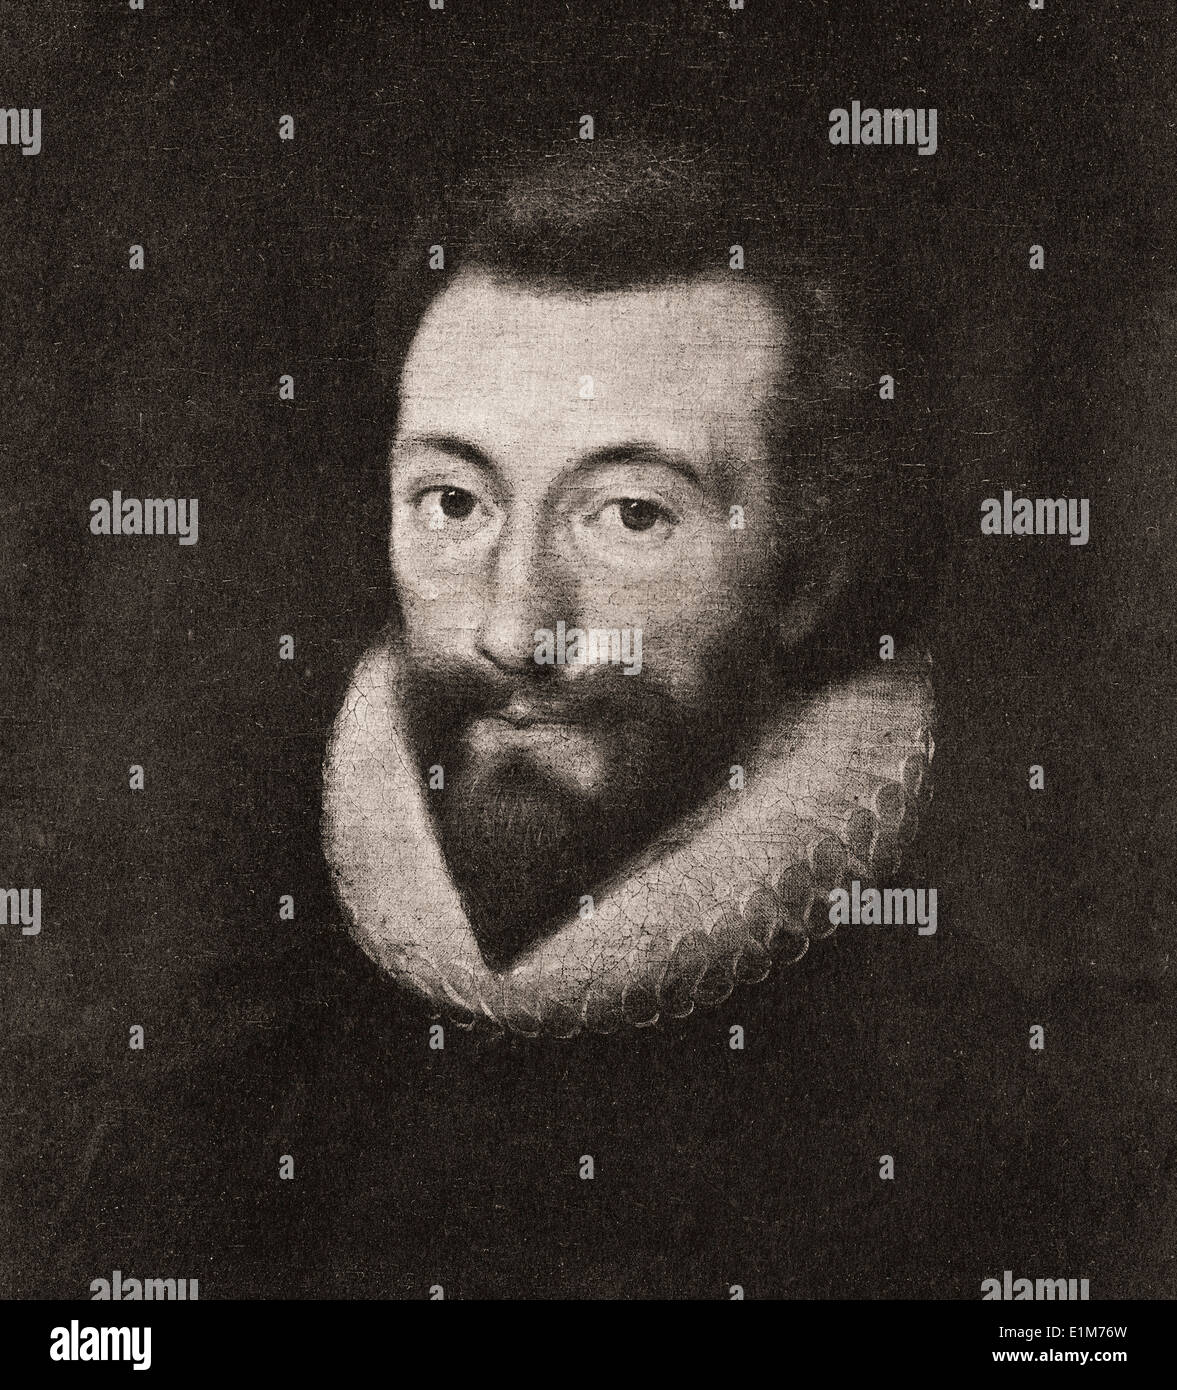 John Donne, aged 44. John Donne, 1572-1631. English metaphysical poet, satirist, lawyer and cleric. Stock Photo